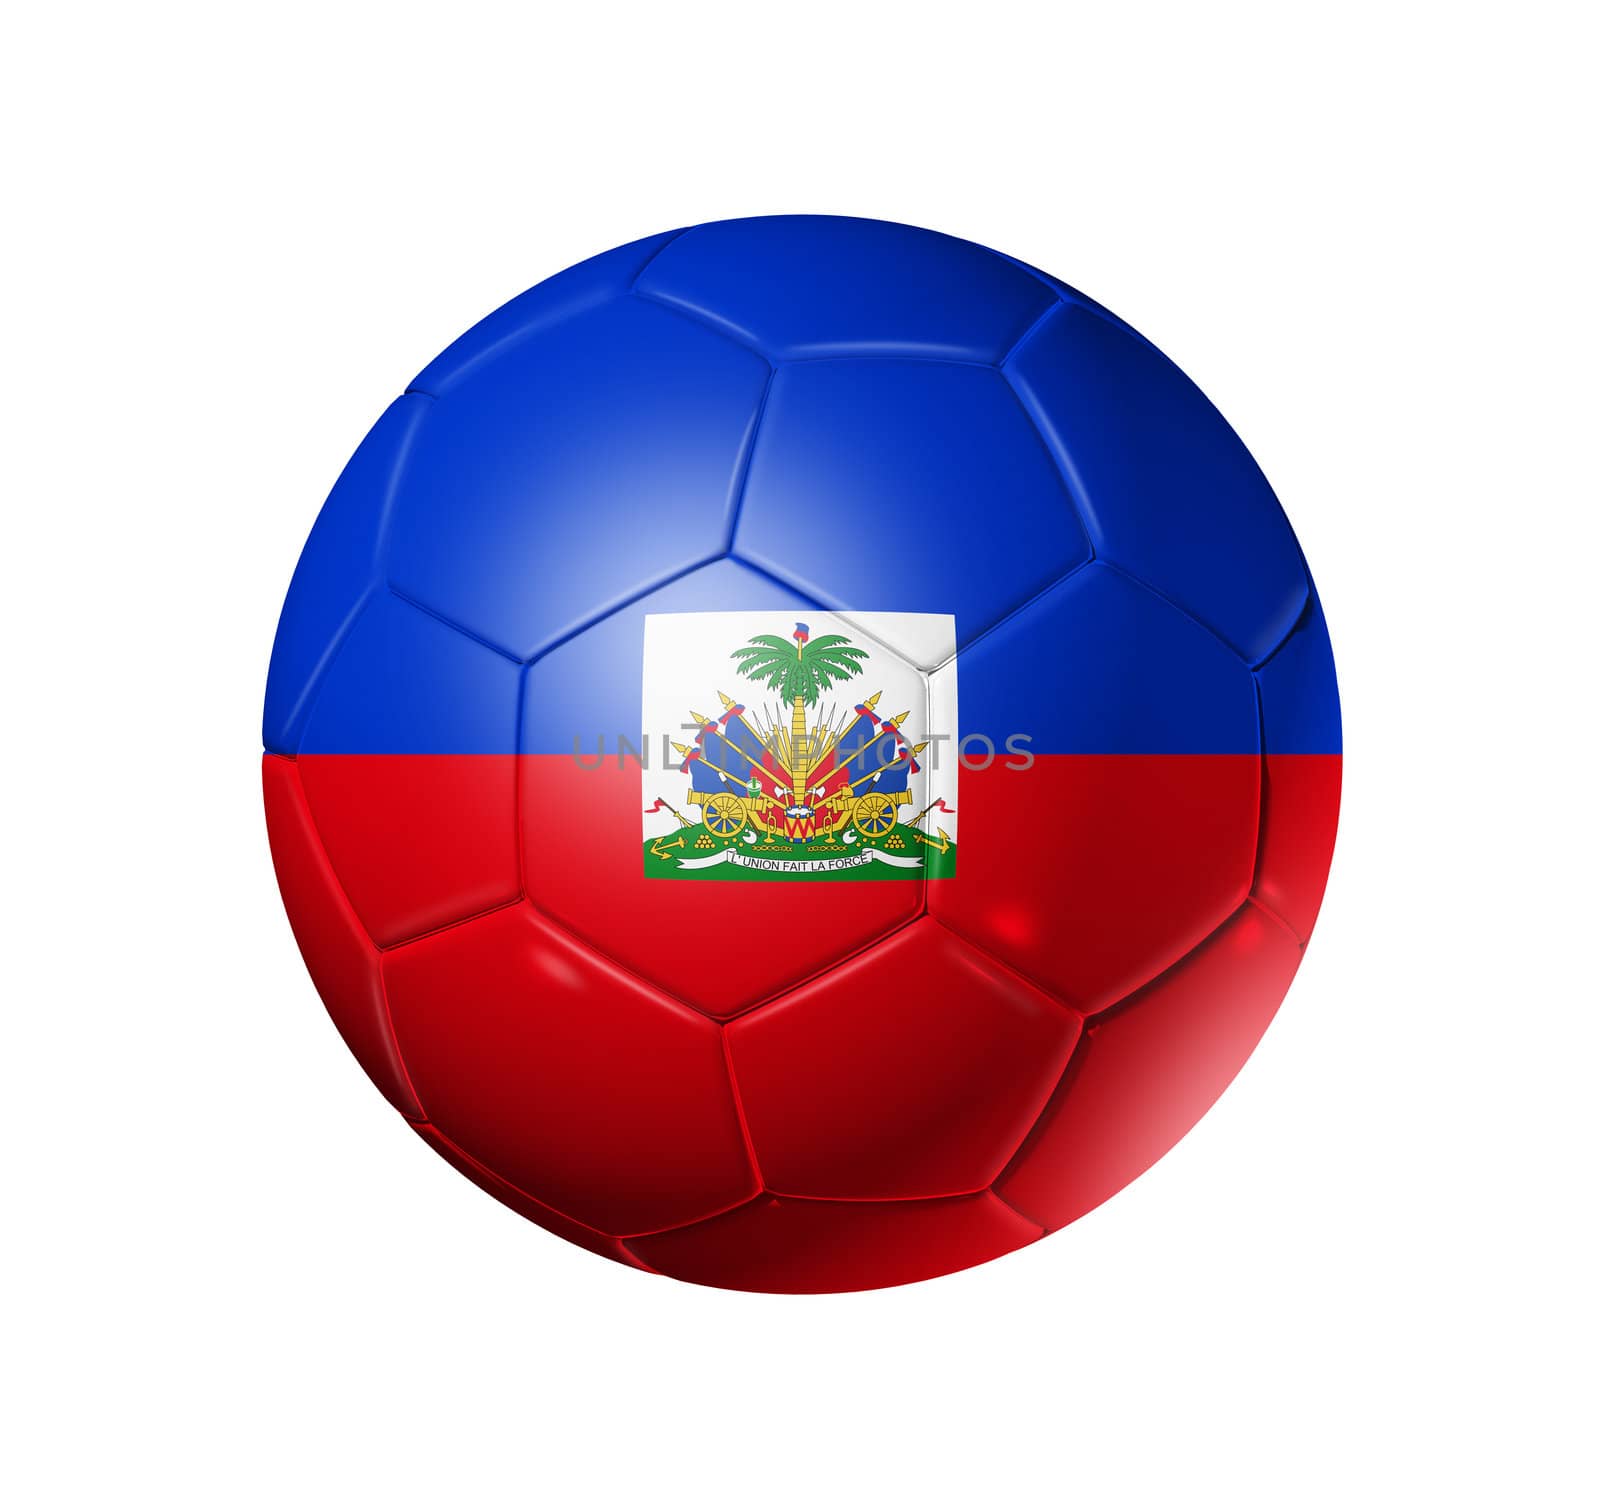 3D soccer ball with Haiti team flag. isolated on white with clipping path